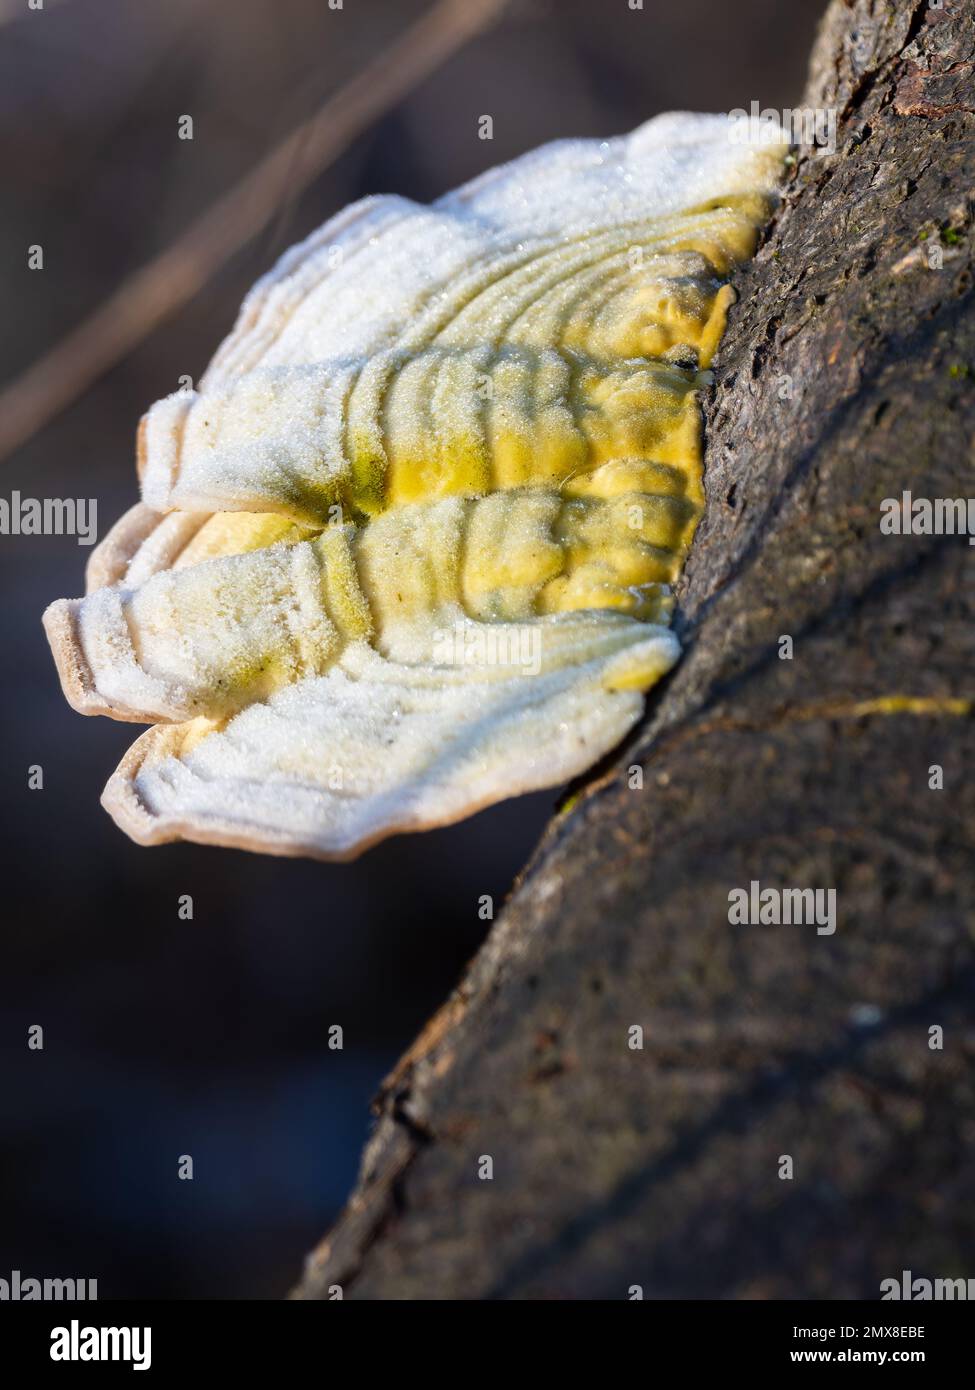 Trametes versicolor fungus, known as turkey tail, growing on a rotten log. Stock Photo